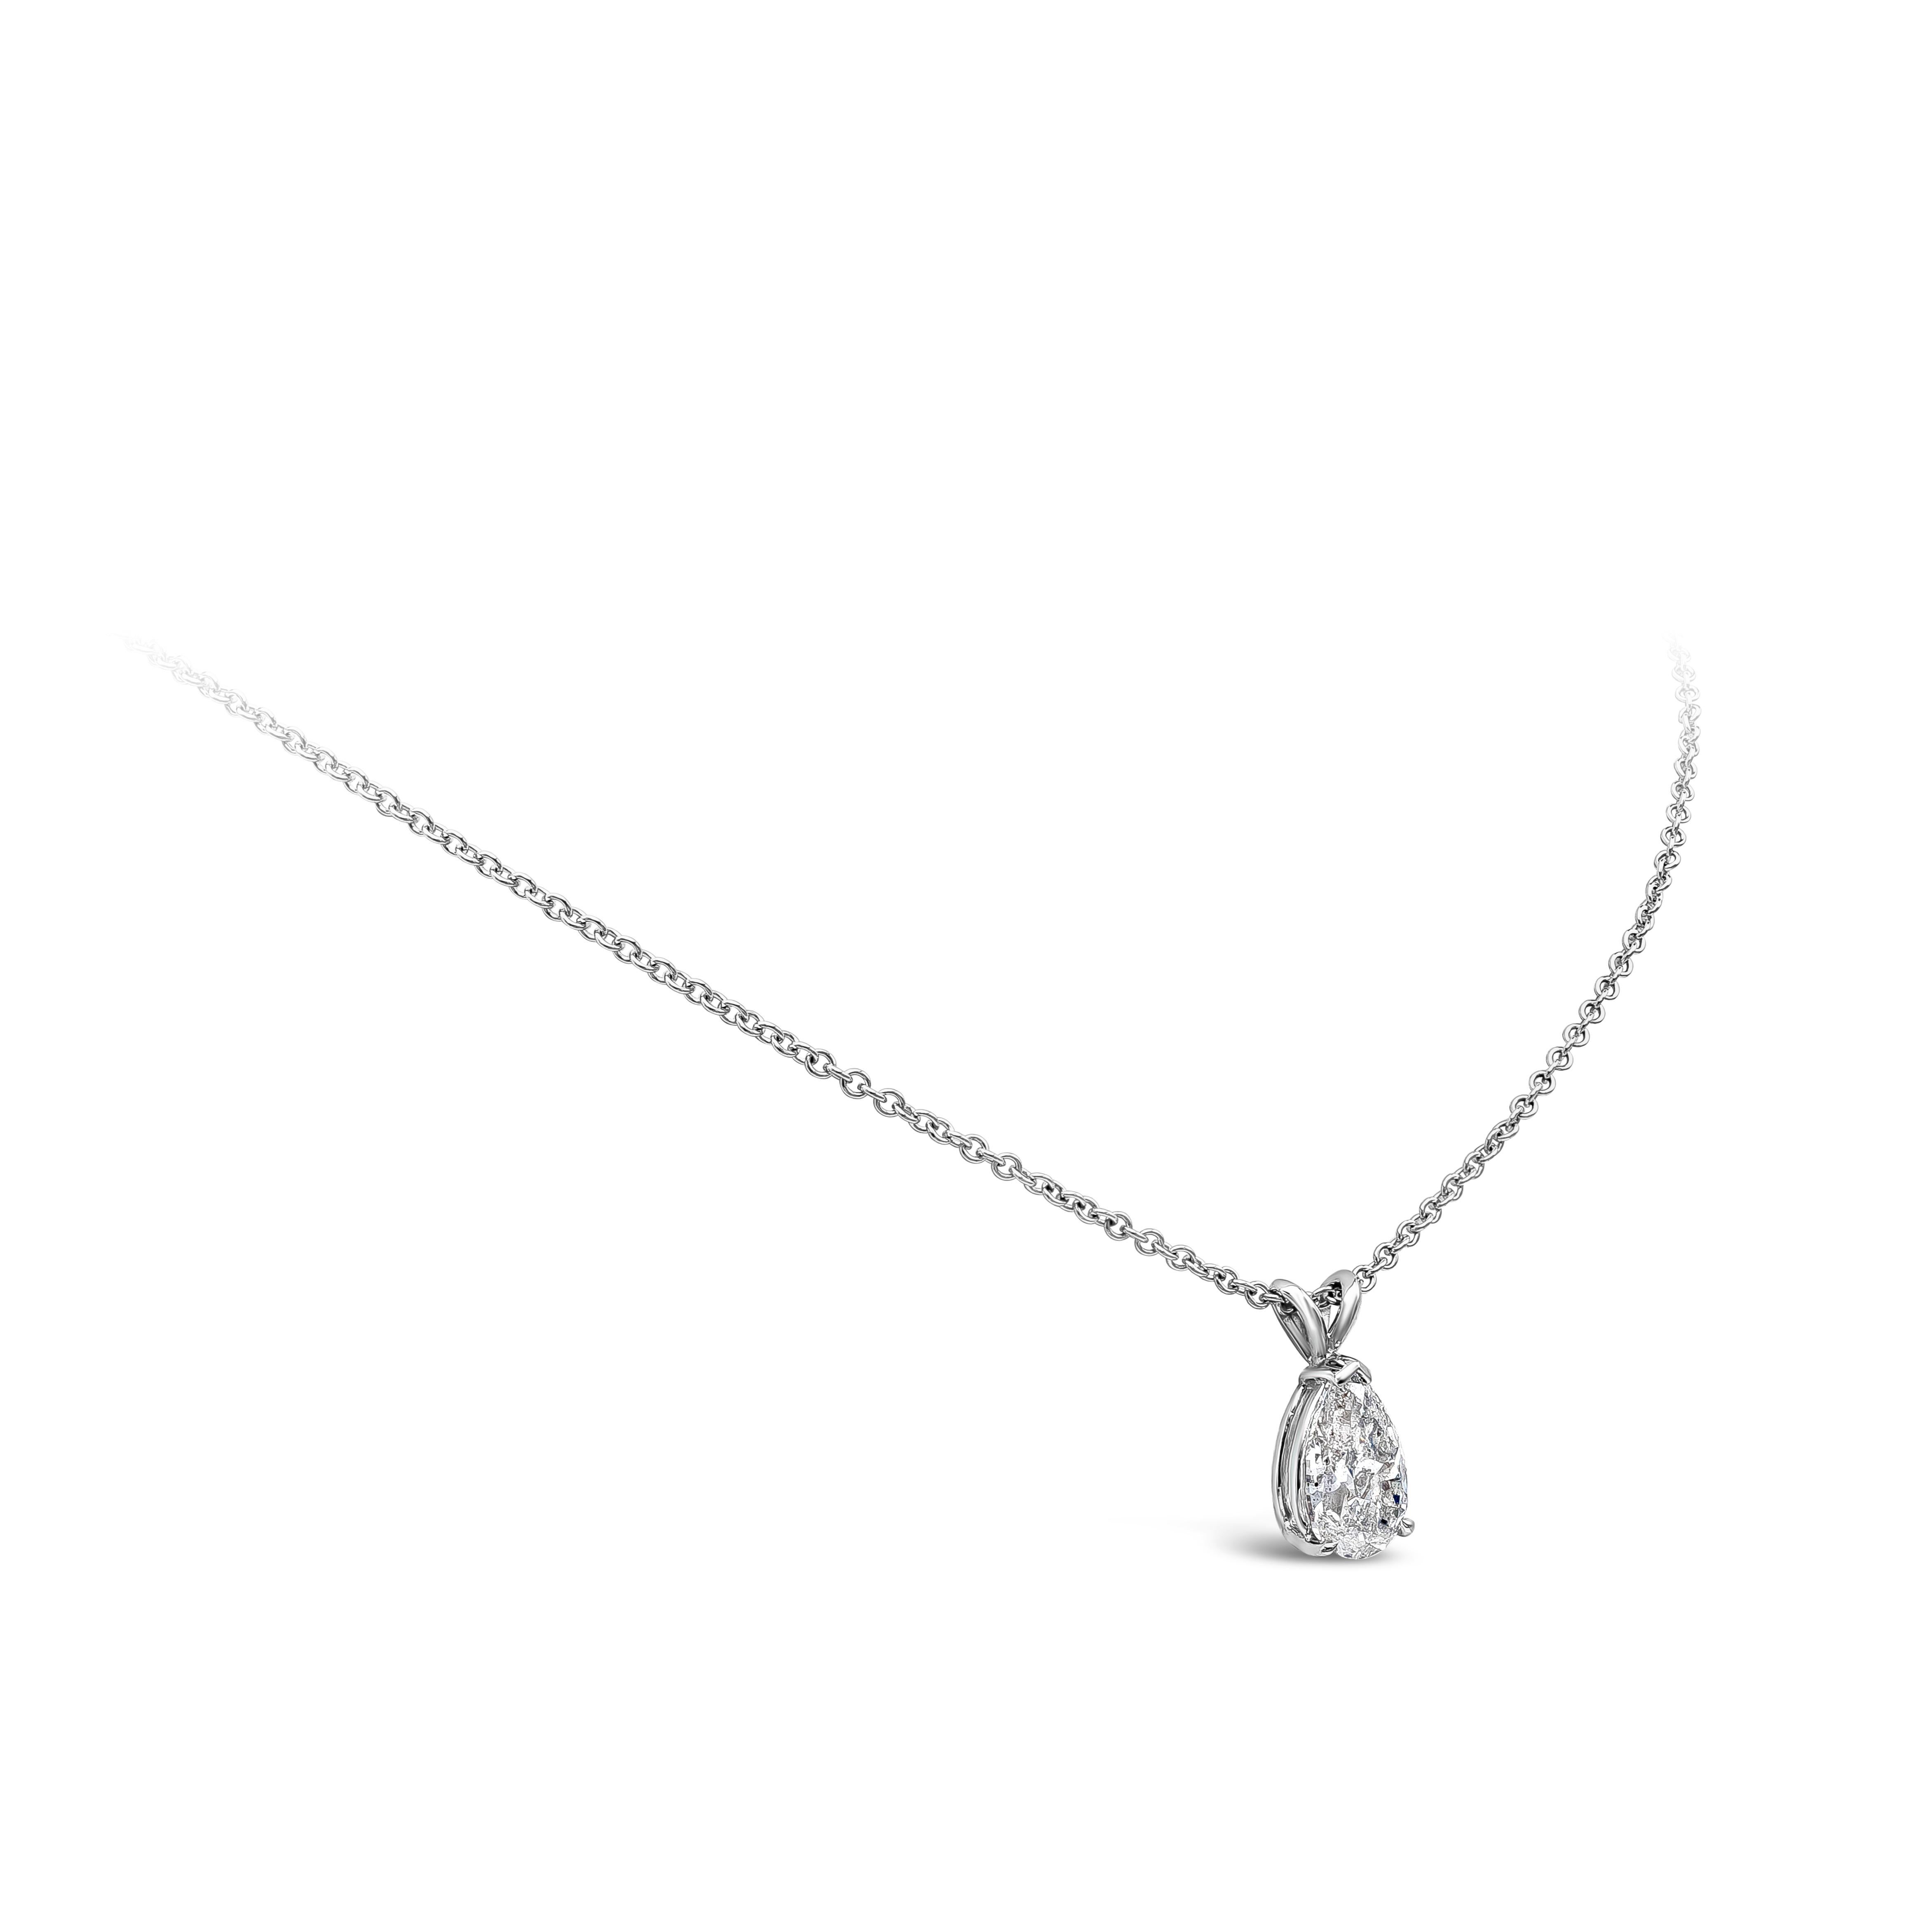 A timeless pendant necklace style showcasing a single 2.05 carat pear shape diamond, set in a 14k white gold mounting. Diamond is approximately G color. Suspended on a 18 inch white gold chain.

Style available in different price ranges. Prices are